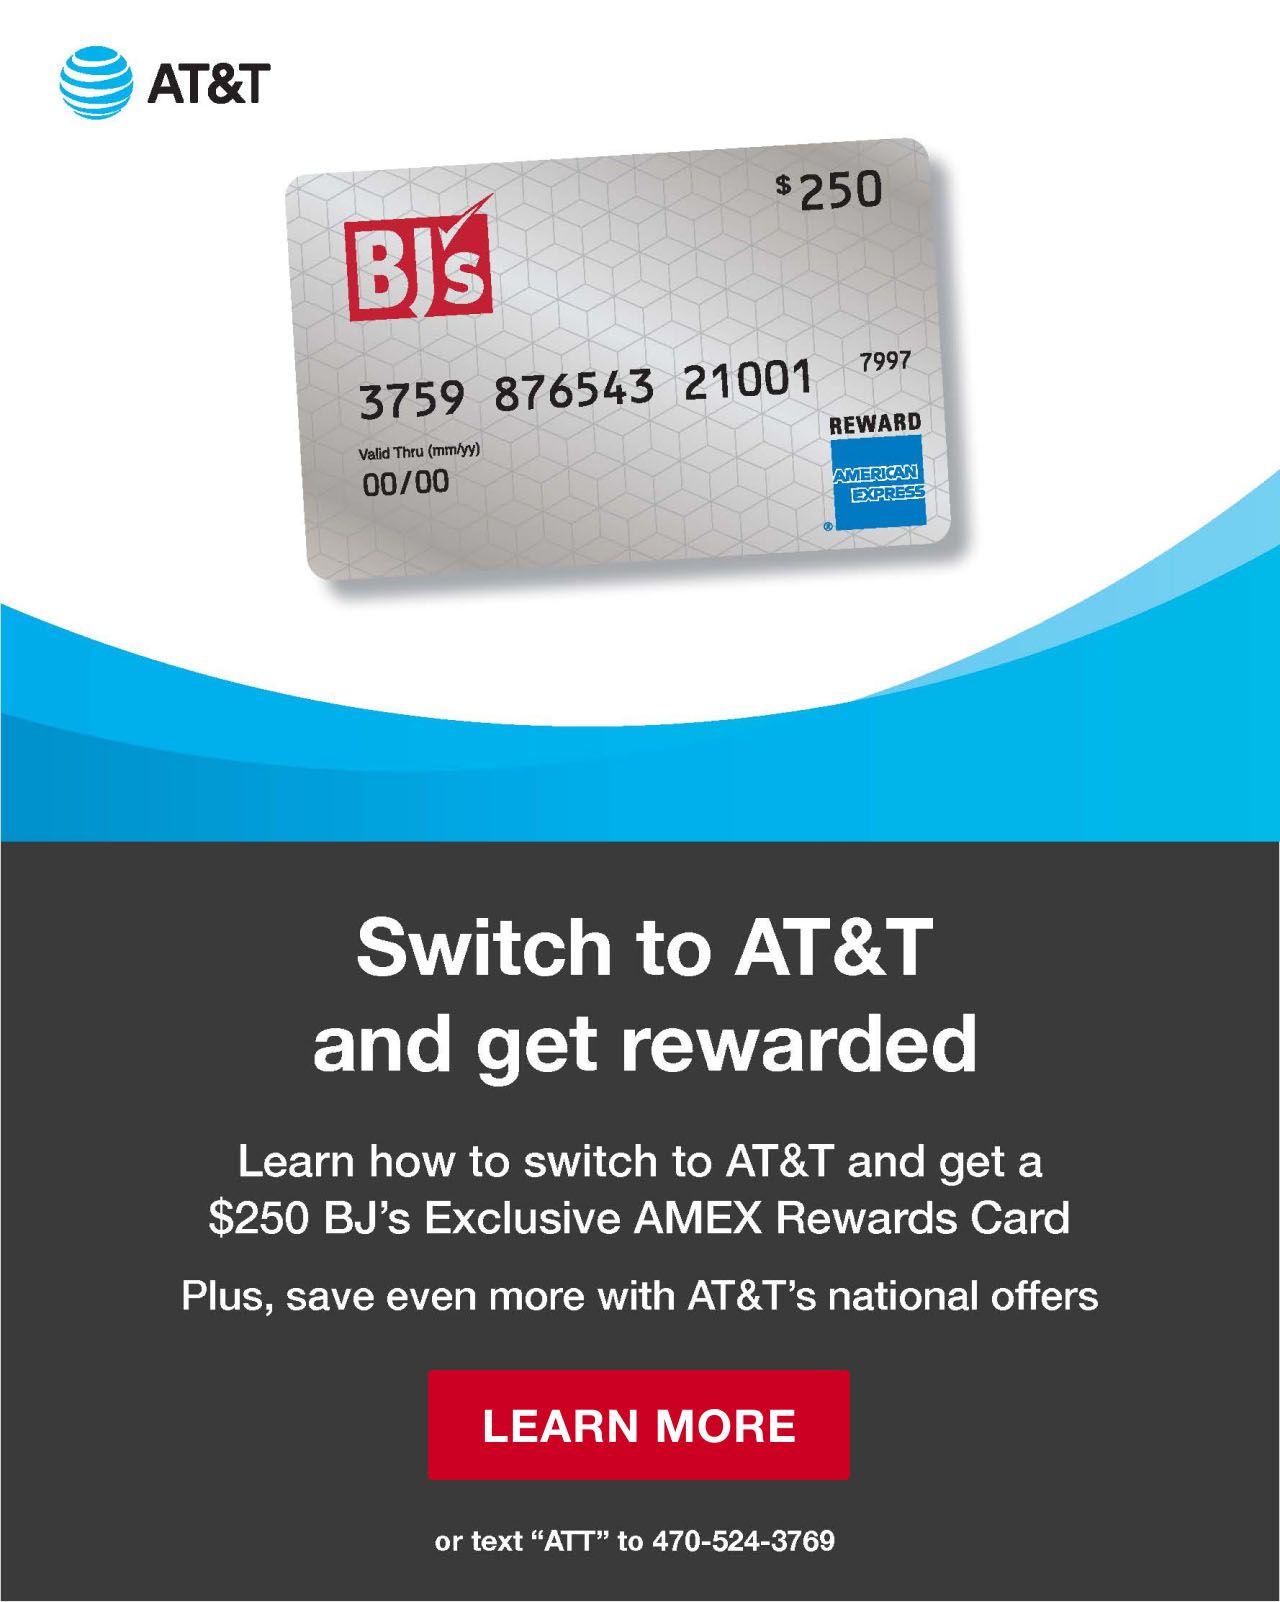 Switch to AT&T and get rewarded. Learn how to switch to AT&T and get a $250 BJ's Exclusive AMEX Rewards Card. Plus, save even more with AT&T's national offers. Click to learn more, or text ATT to 470-524-3769